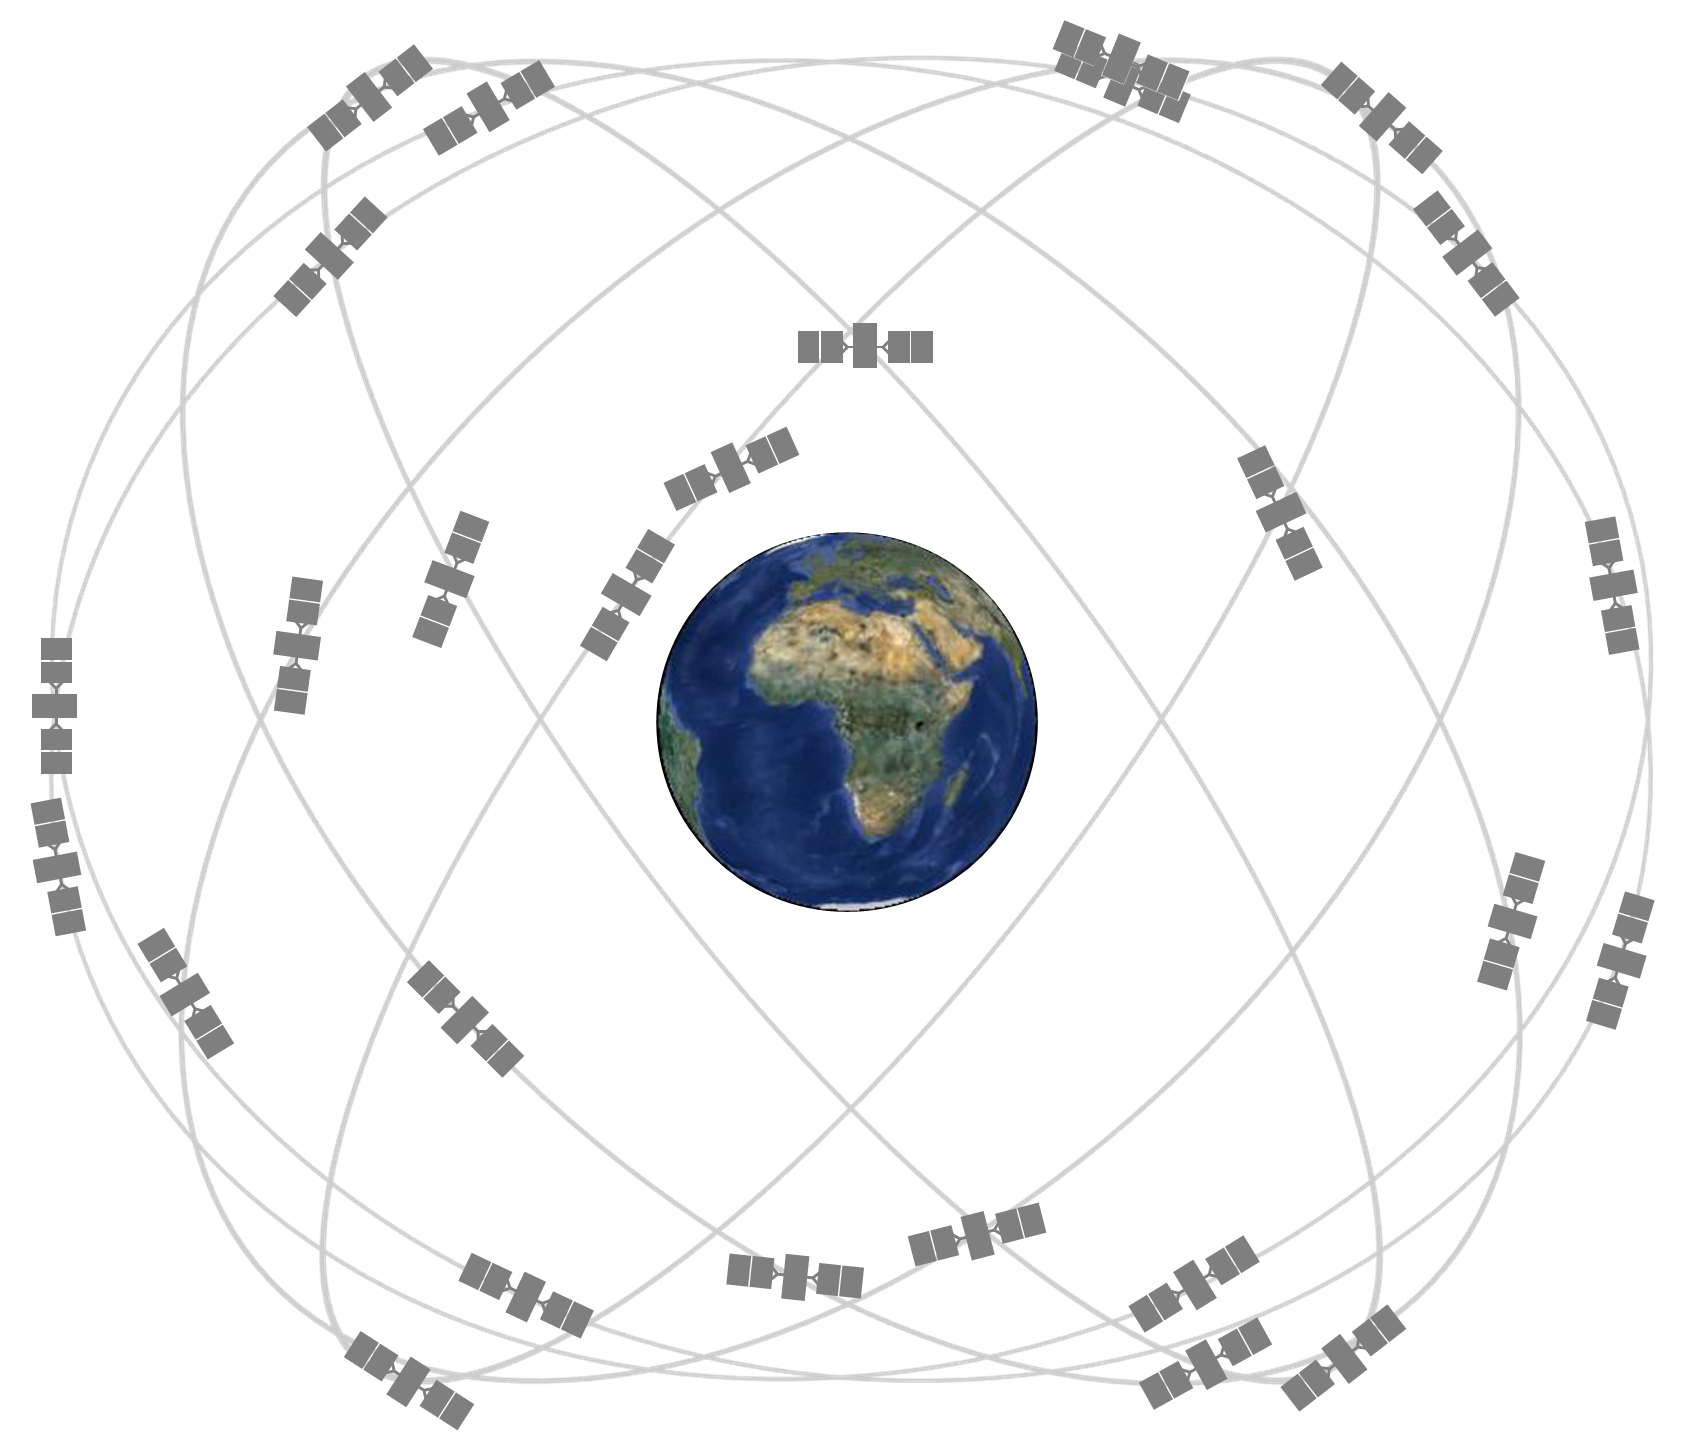 Public Interface Control Working Group and Forum for NAVSTAR GPS Set for Sept. 12